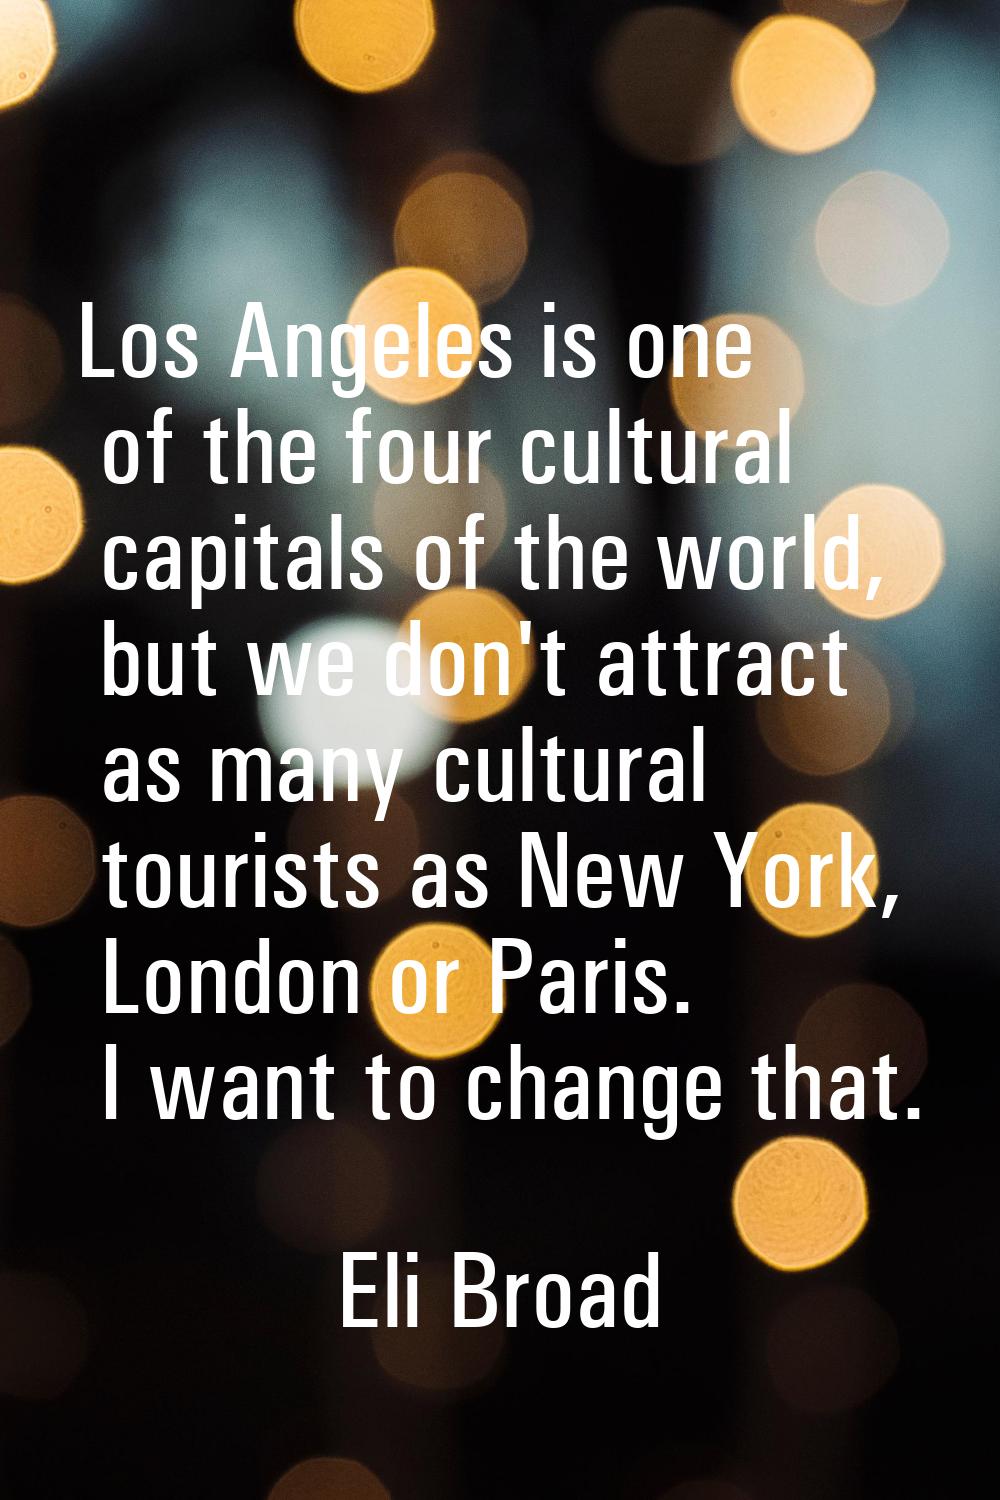 Los Angeles is one of the four cultural capitals of the world, but we don't attract as many cultura